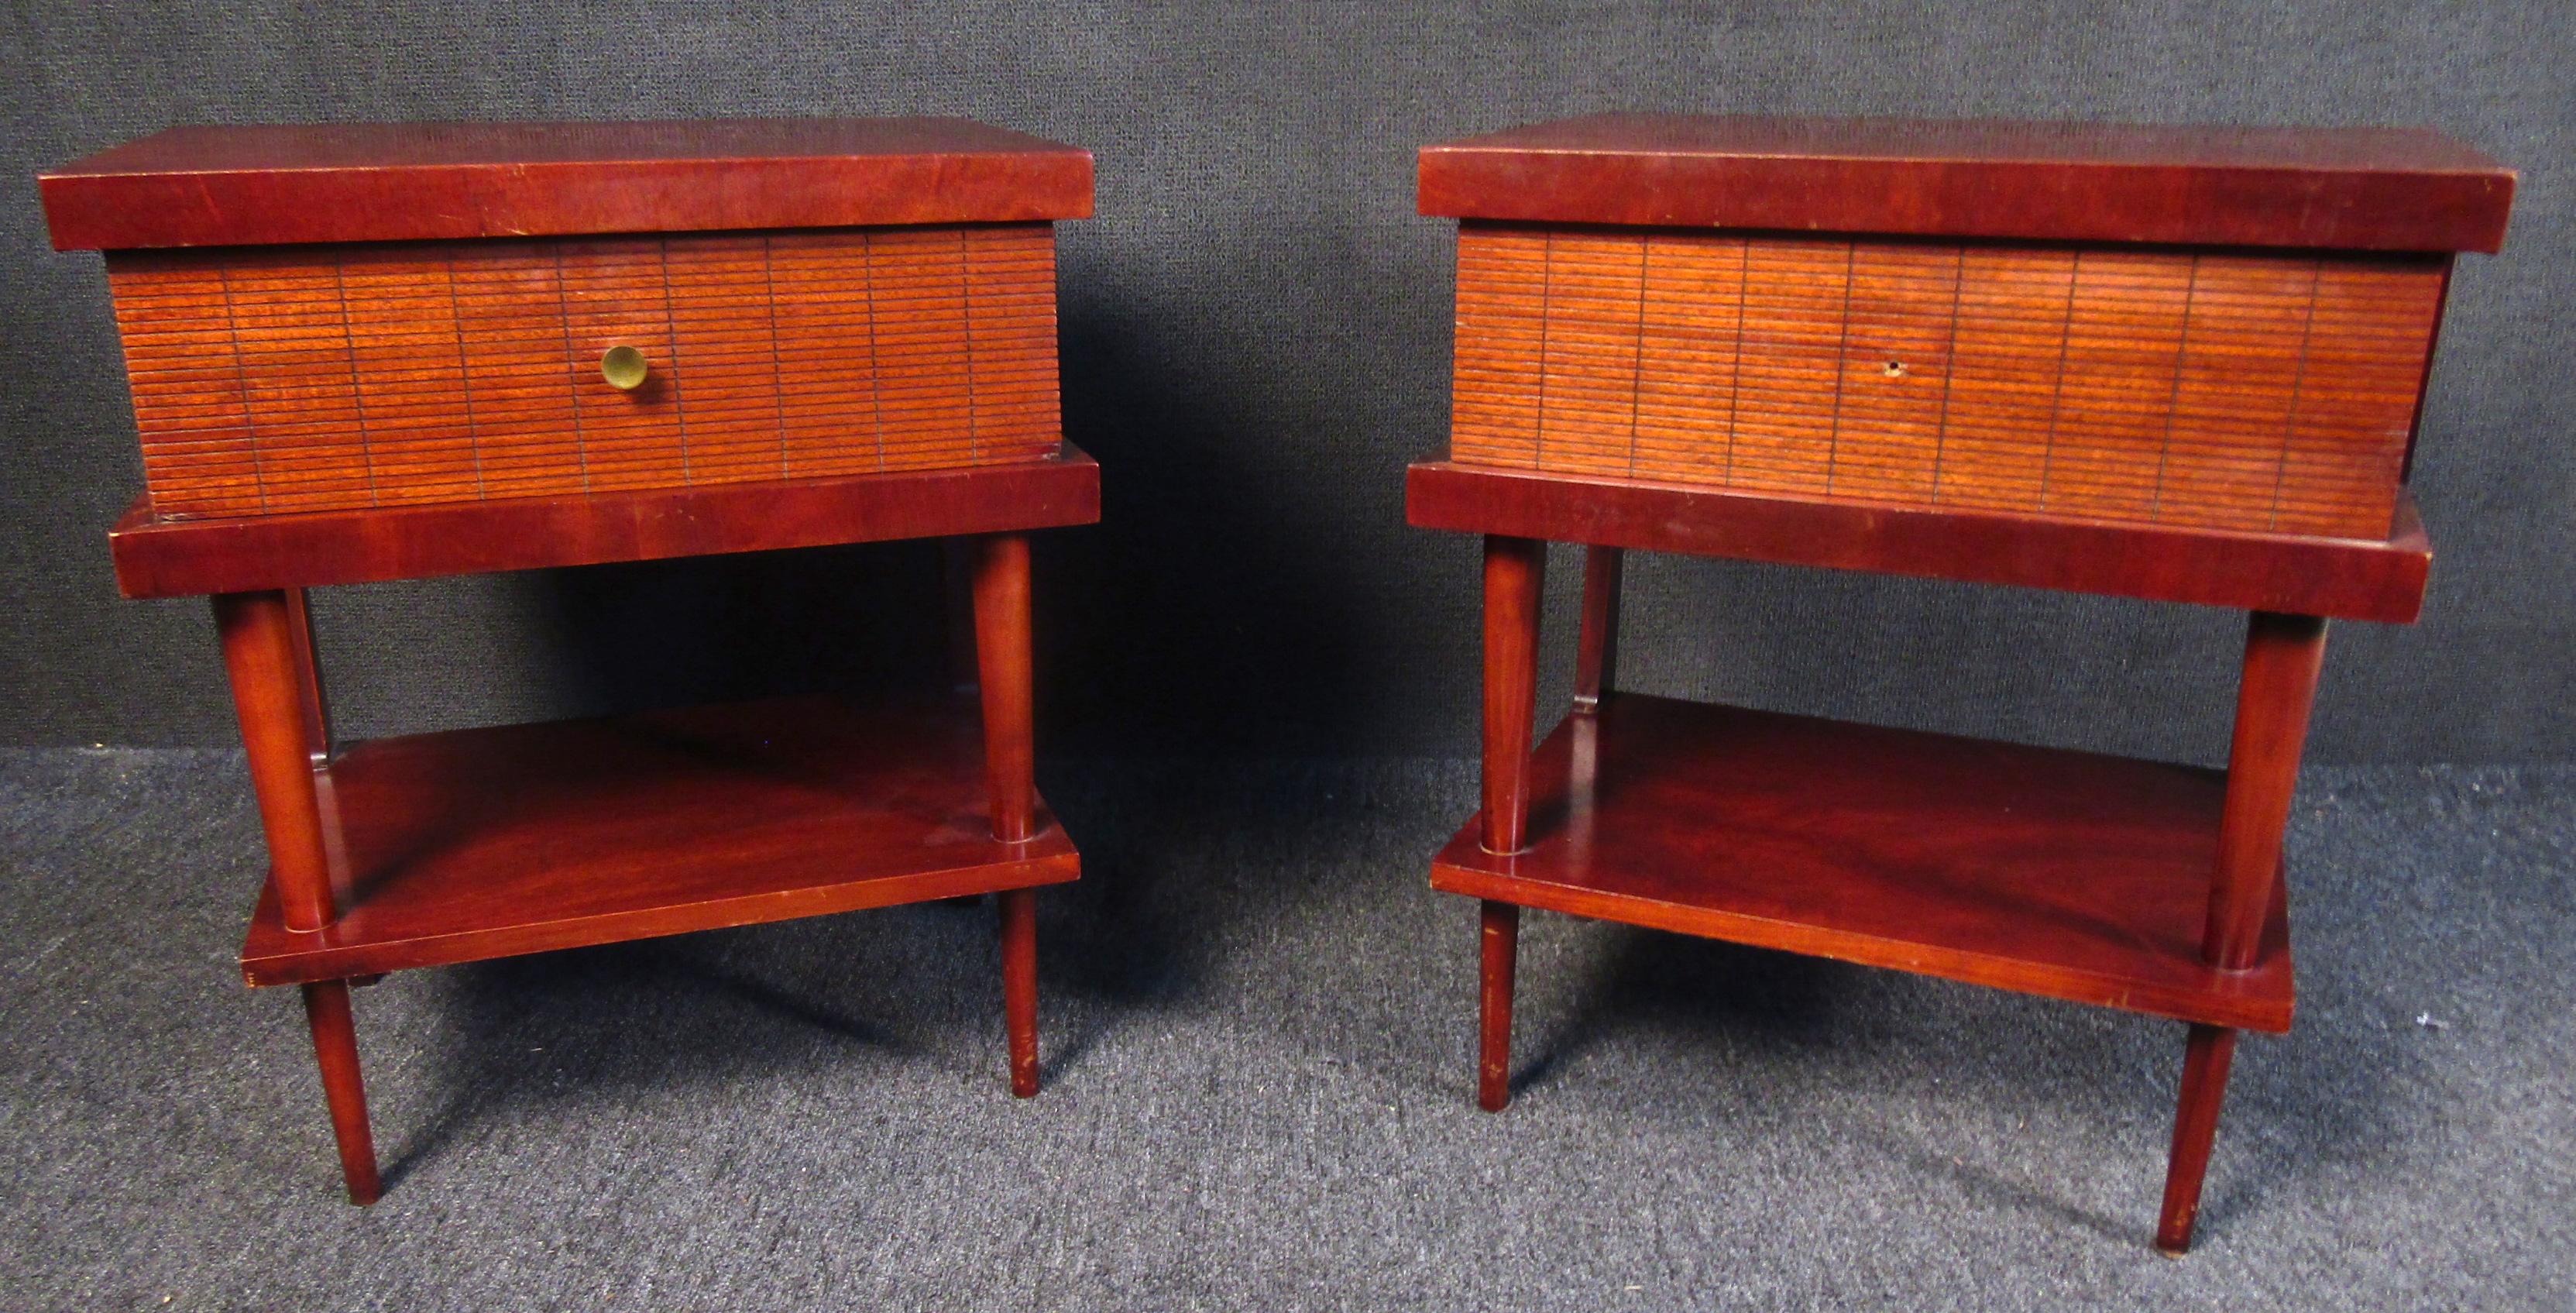 Beautiful vintage modern wood side tables. Each side table features a spacious drawer and shelf below. The drawers are carved in a unique etched grid pattern, encased within a shell of rich red wood, on tapered legs.

Please confirm item location